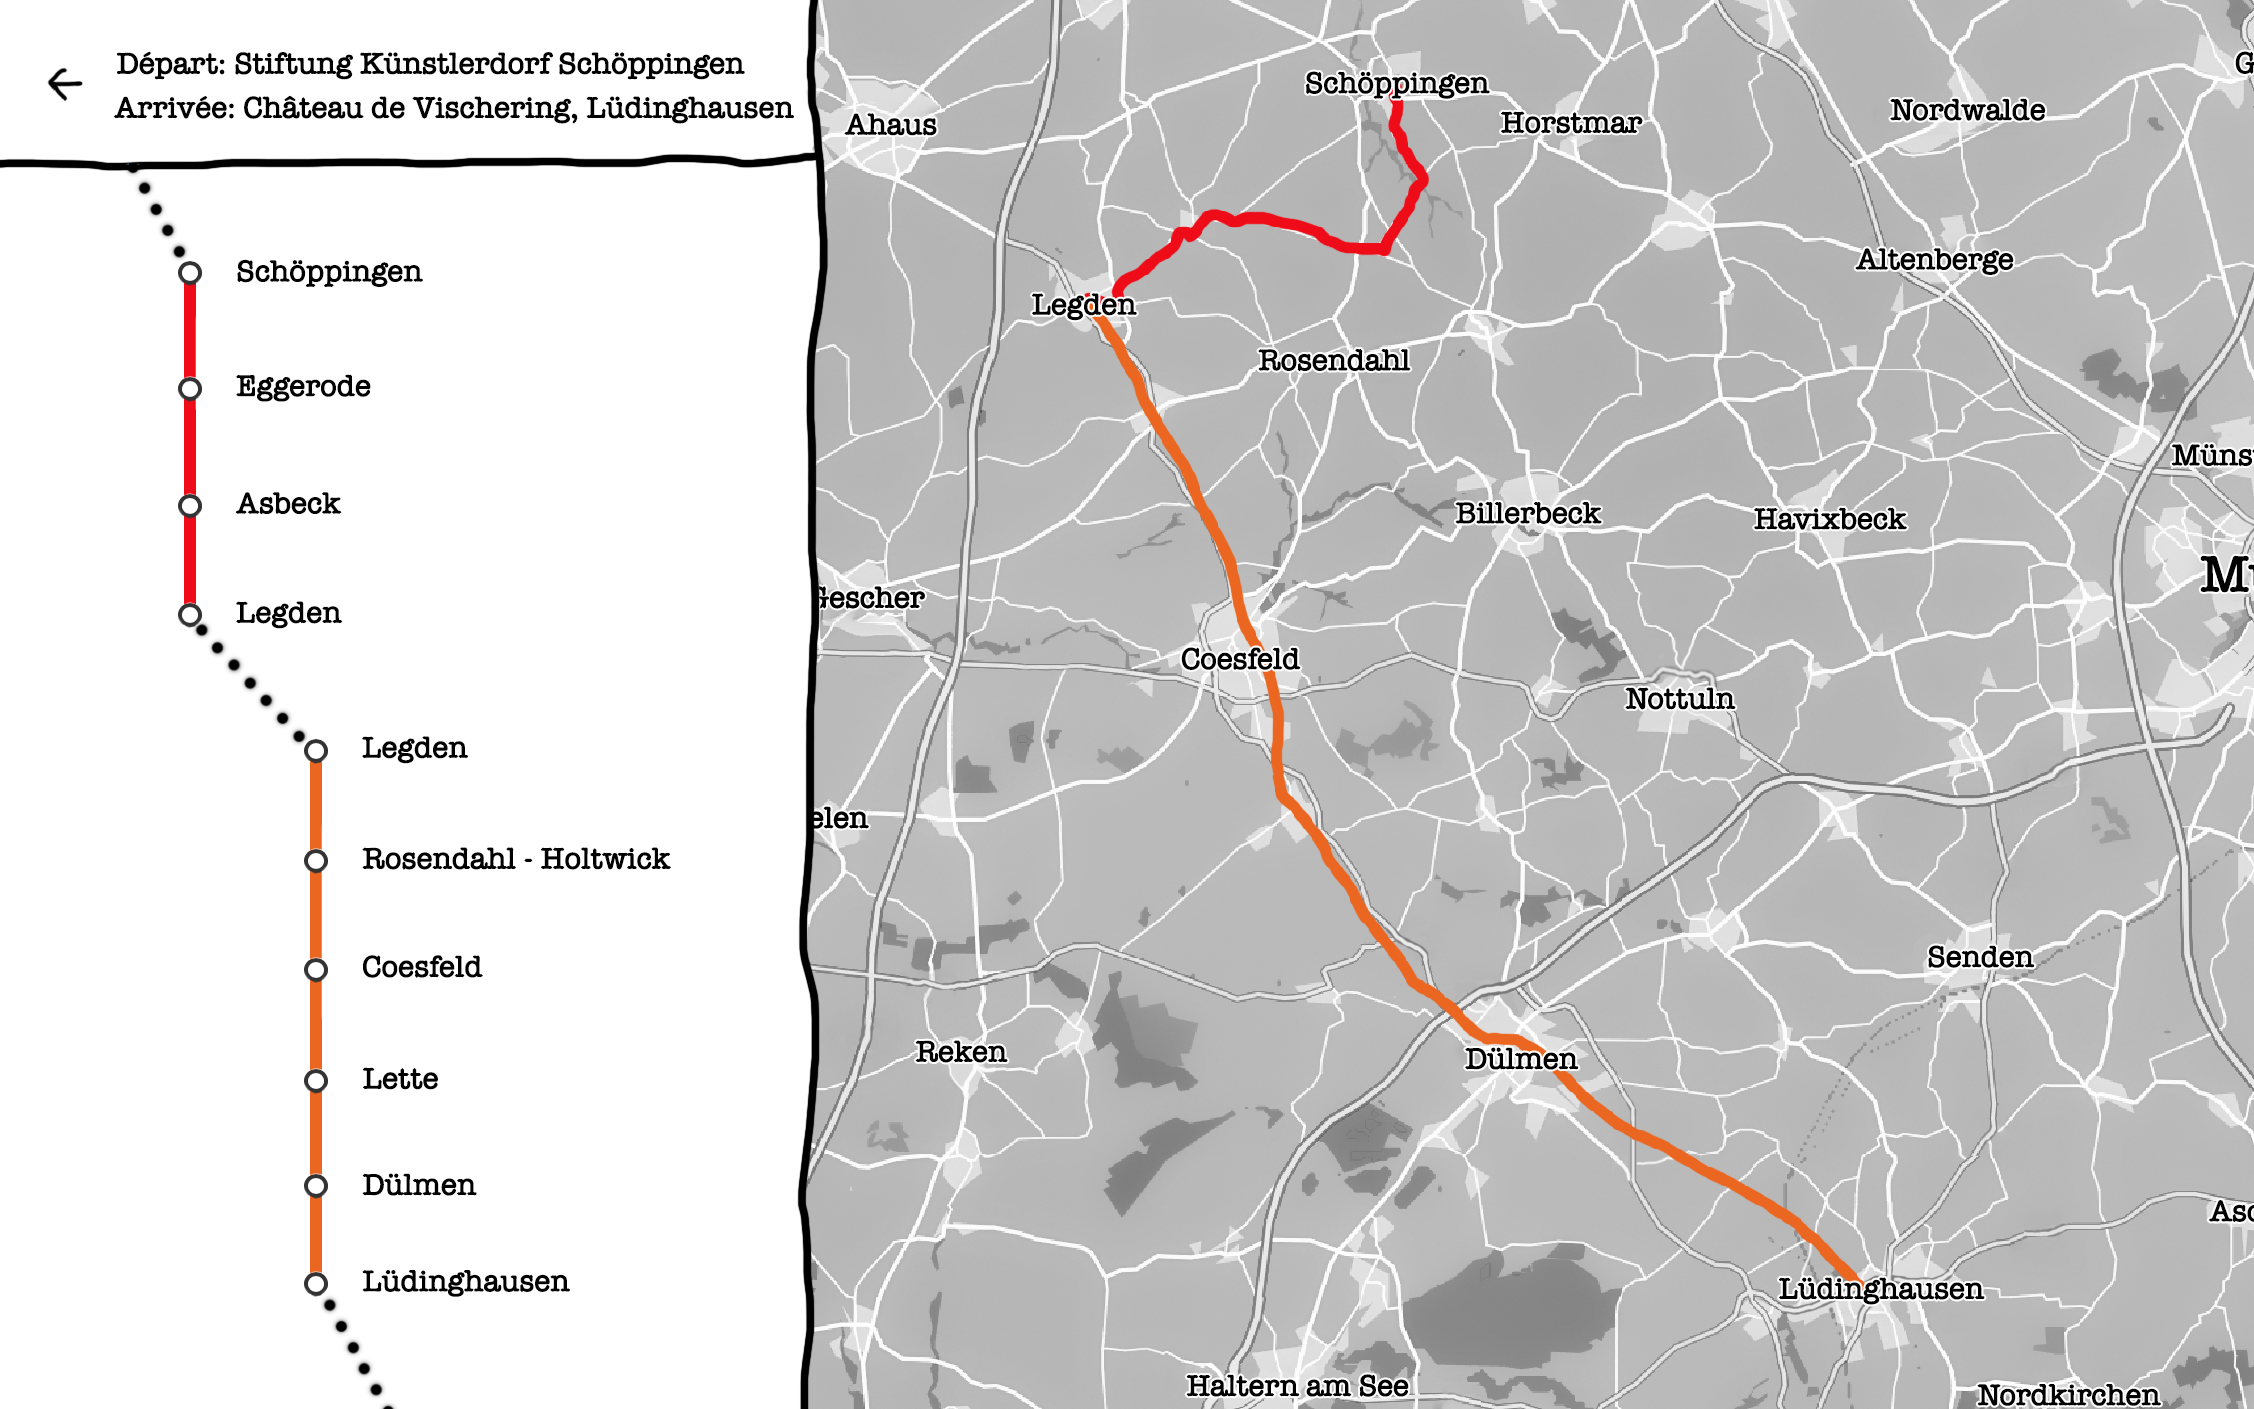 Drawn map of the way from Schöppingen to Lüdinghausen.